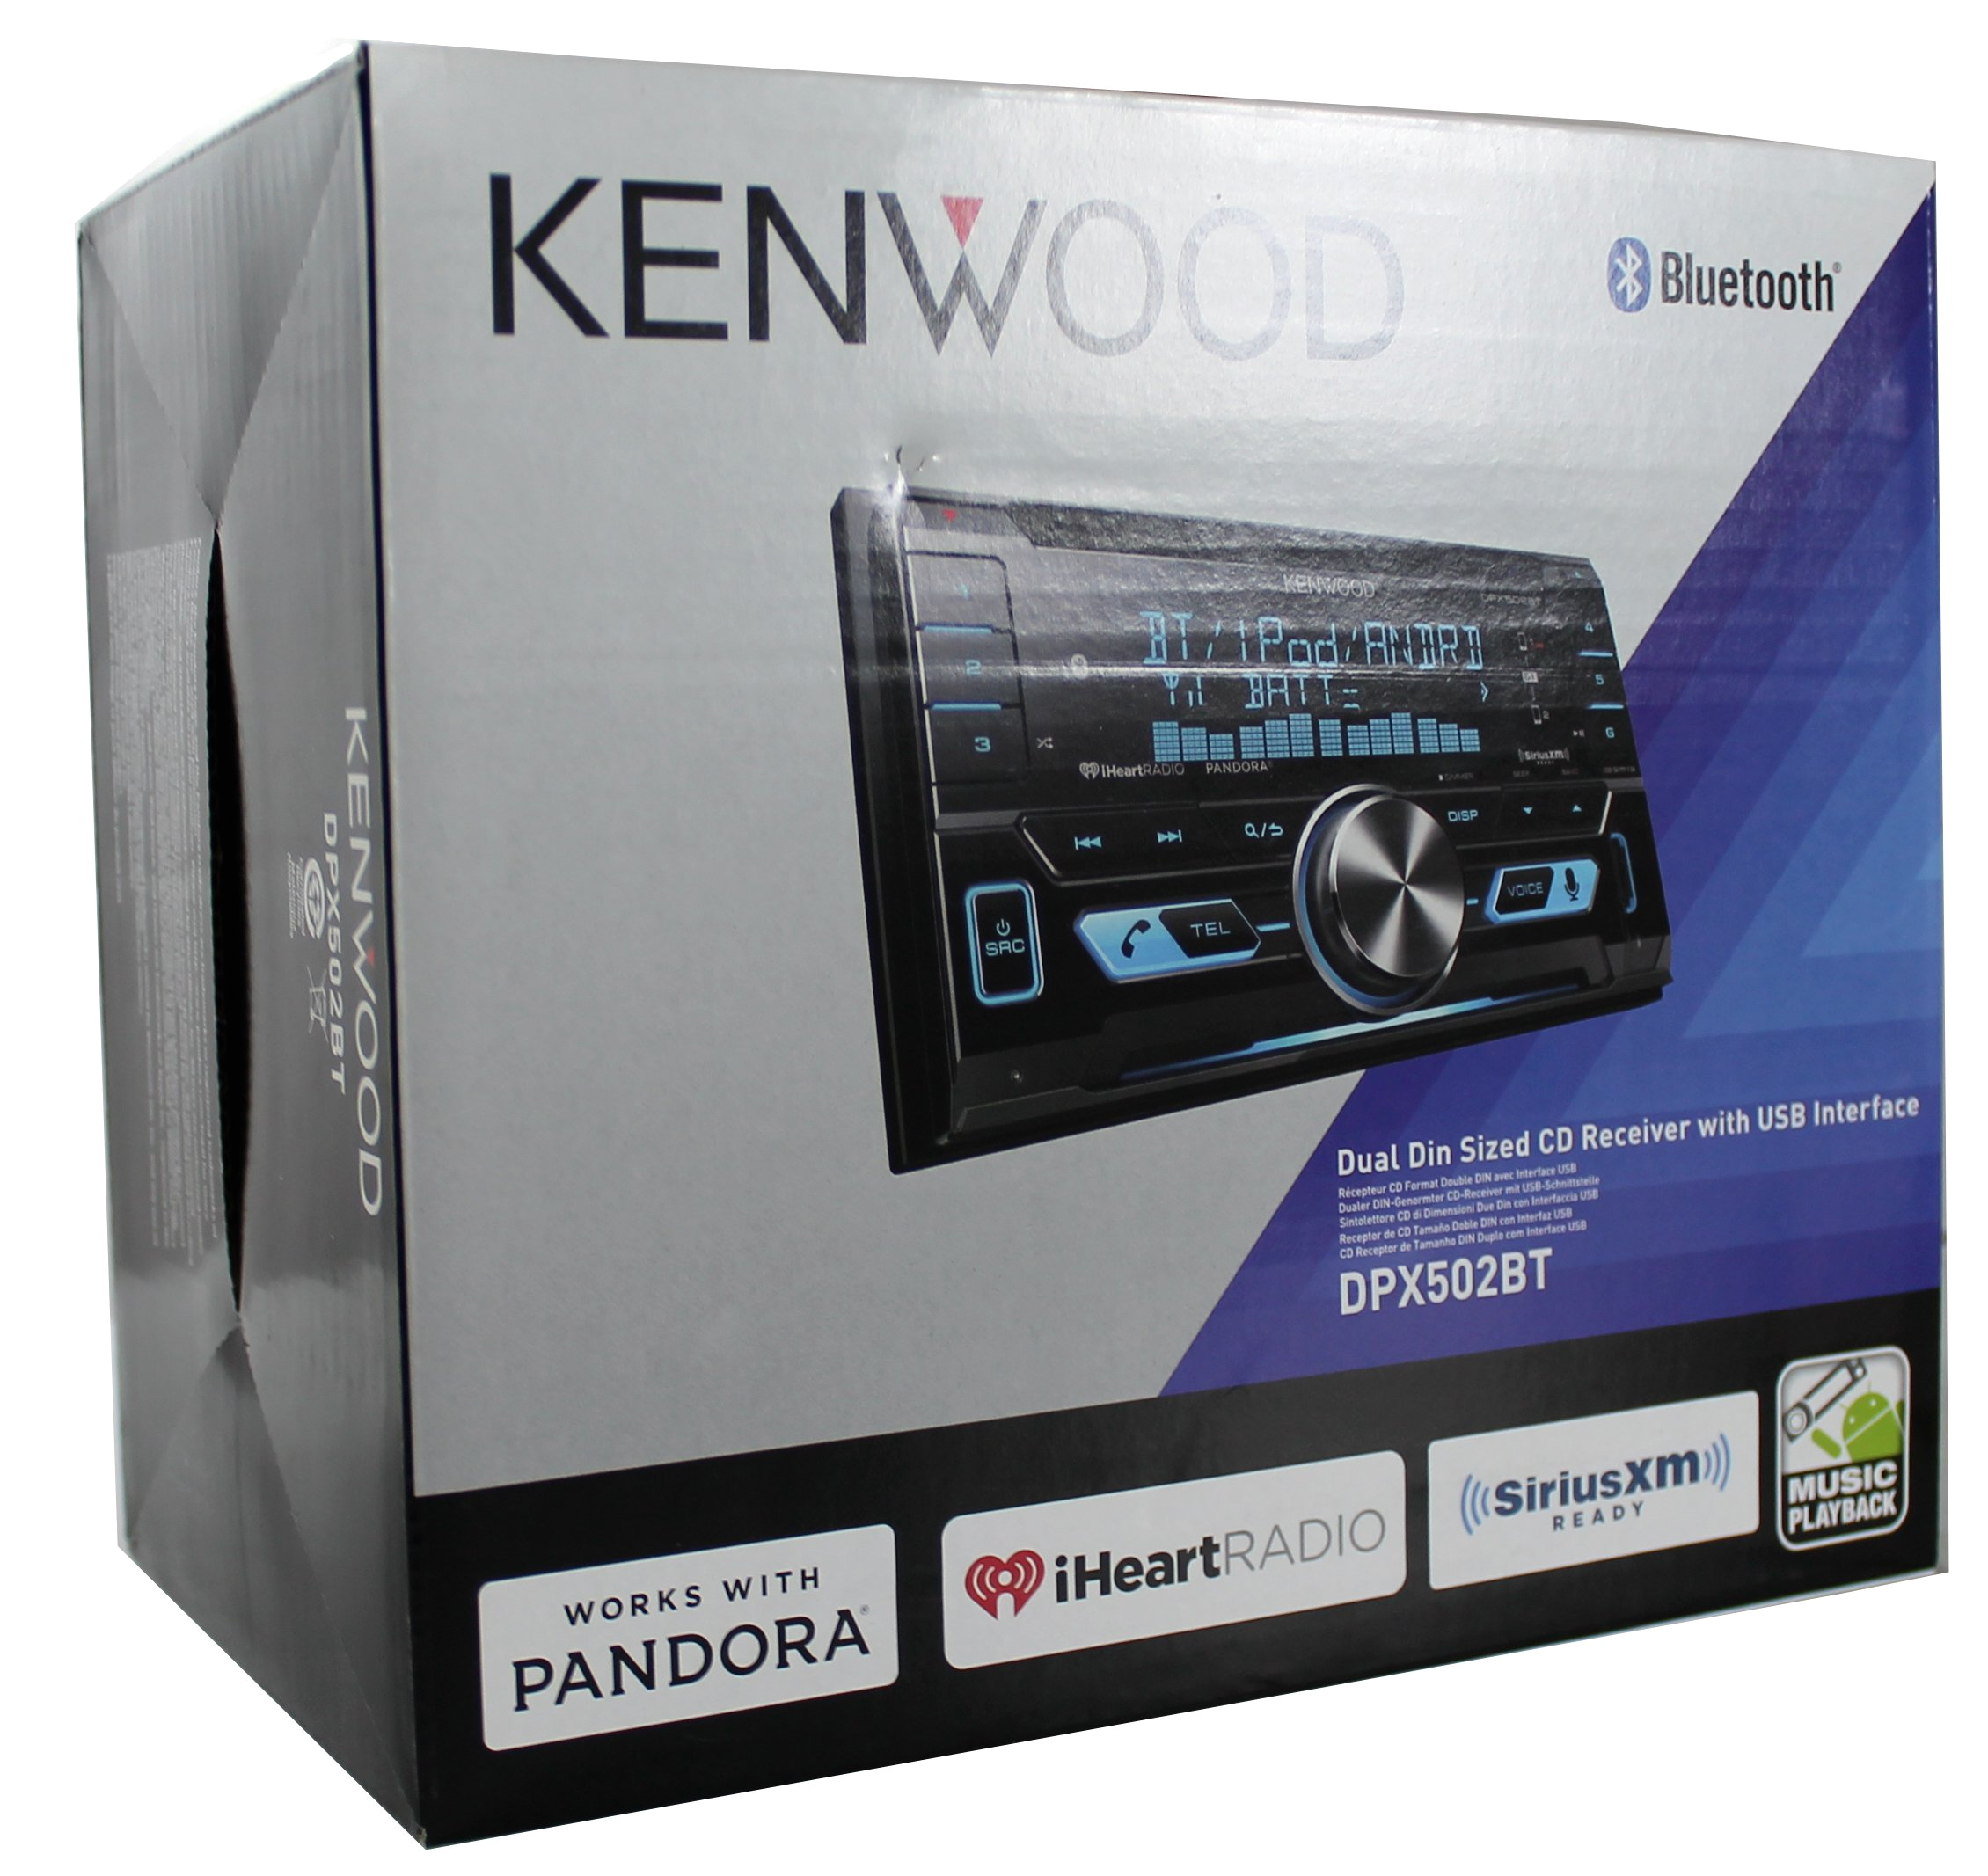 kenwood dpx502bt double din in dash cd receiver with bluetooth front usb and auxiliary inputs and siriusxm ready walmart com